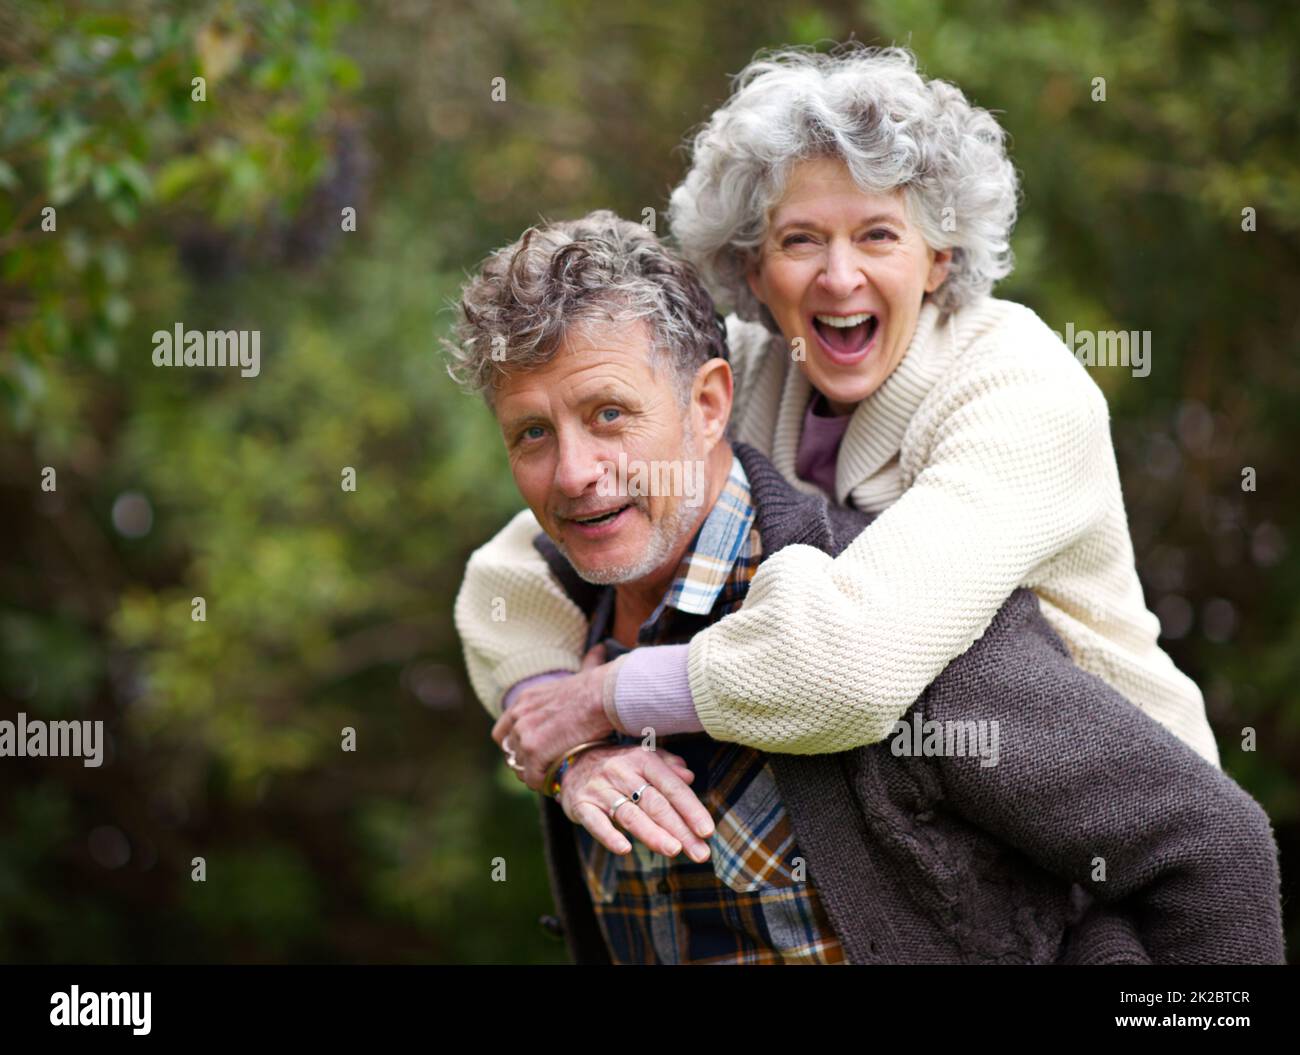 Golden moments together. Shot of a loving senior couple being playful outside. Stock Photo